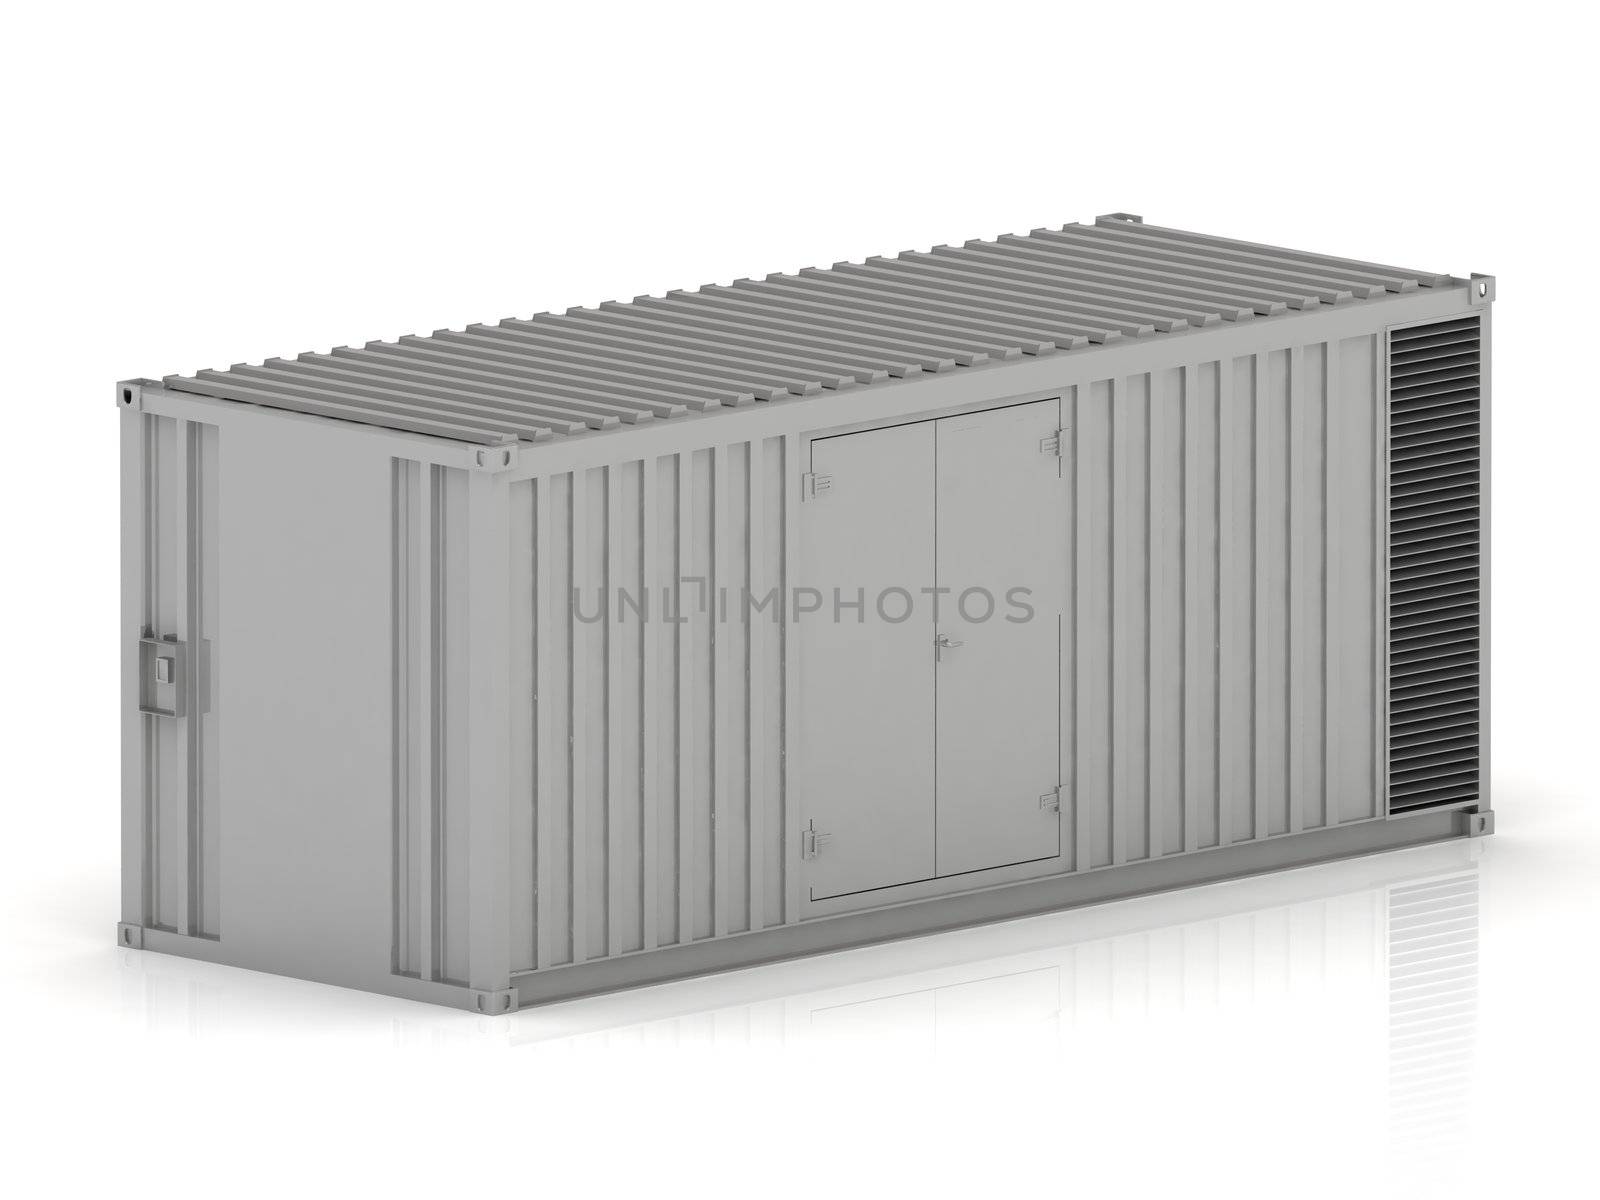 3D cargo container on a white background